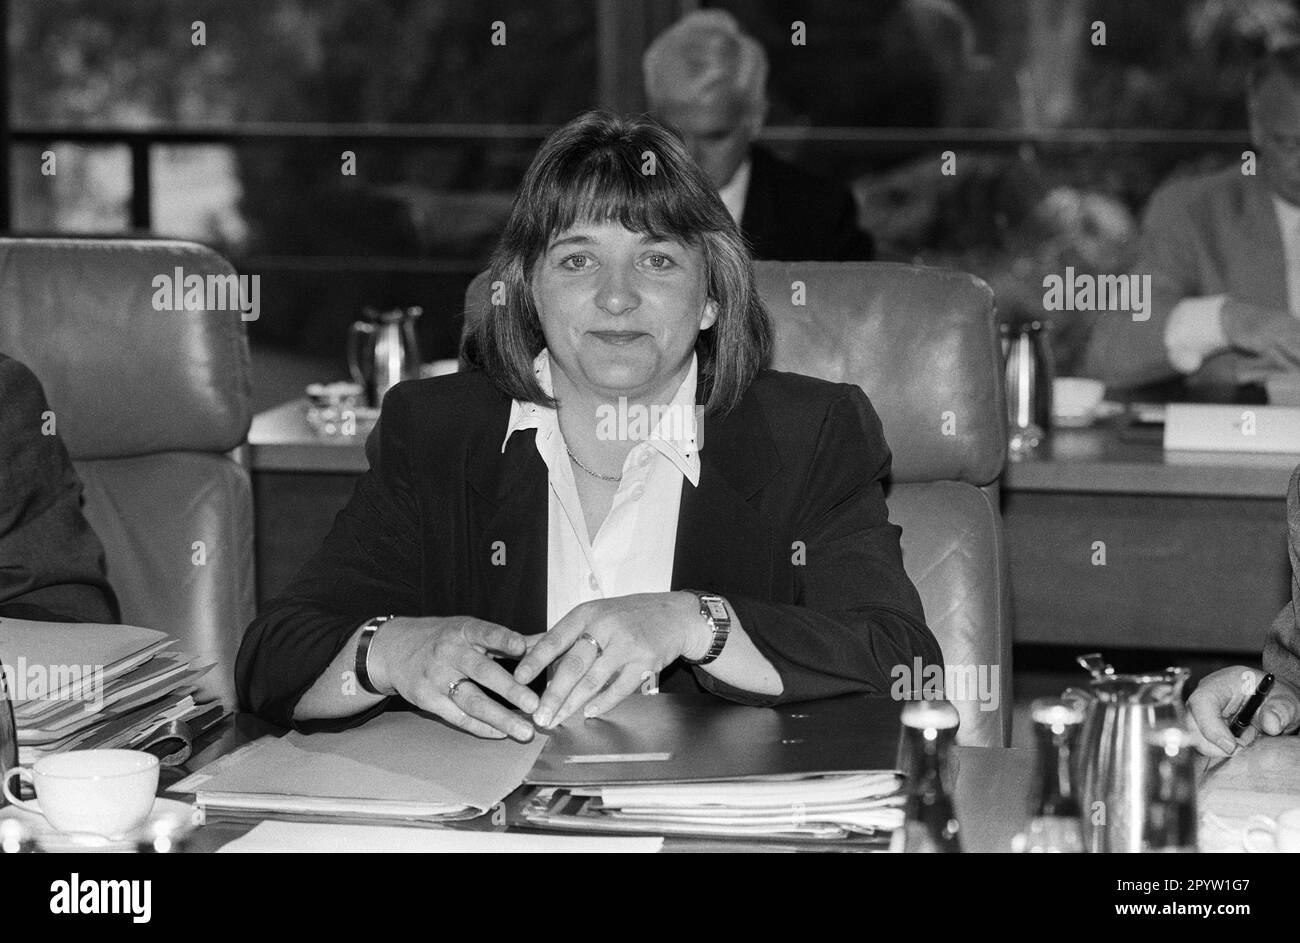 Germany, Bonn, 26/05/1992 Archive: 34-06-15 Cabinet meeting Photo: Sabine Leutheusser-Schnarrenberger, Federal Minister of Justice [automated translation] Stock Photo